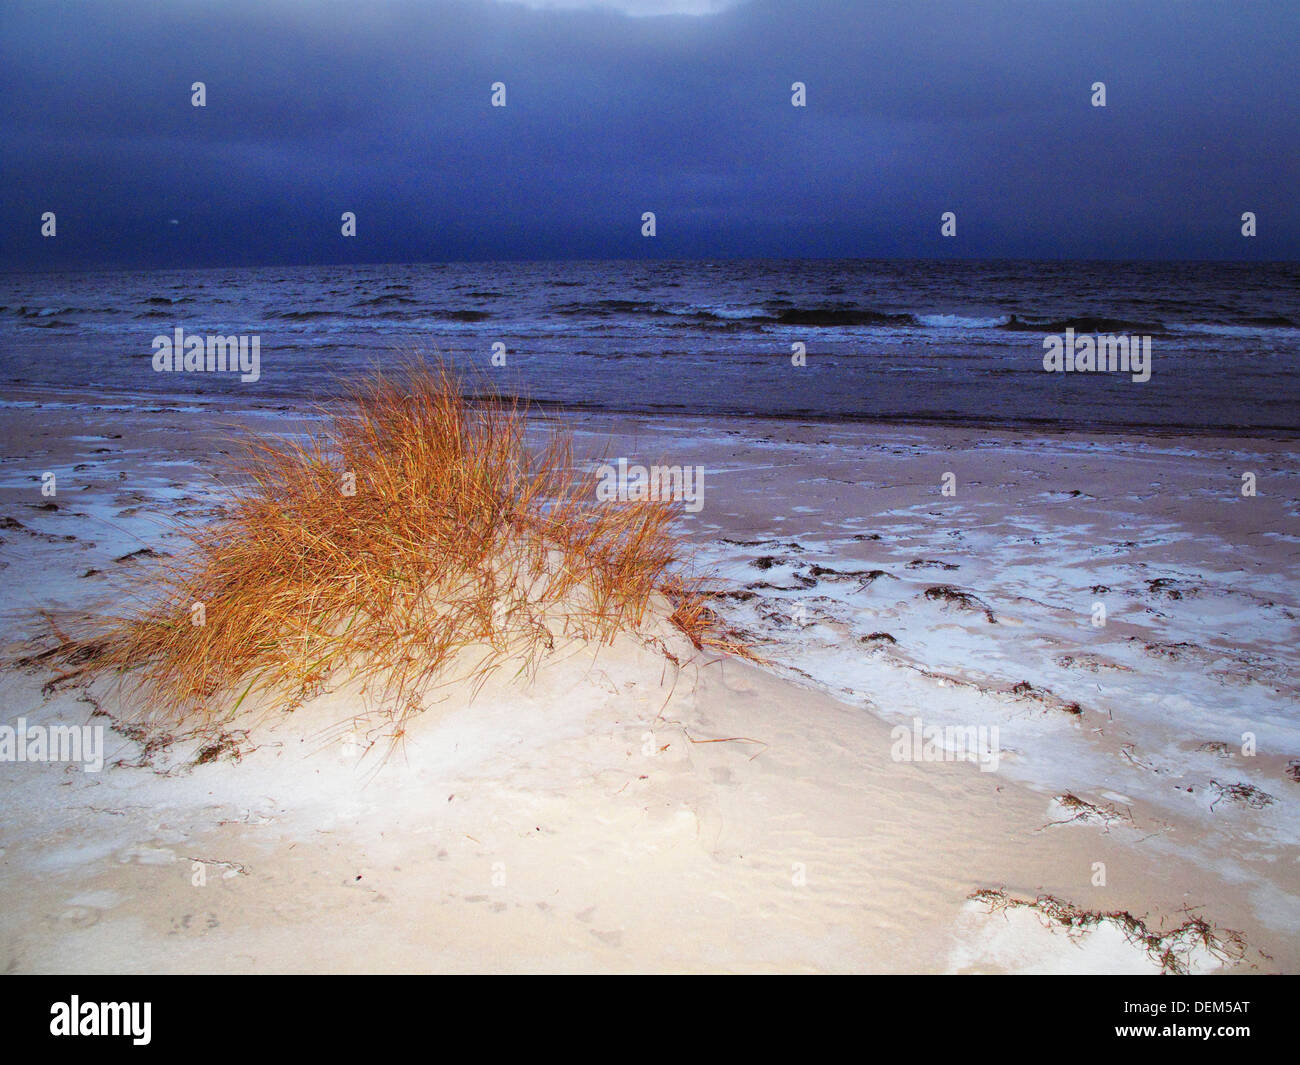 Patch of Tall Grass and Snow on Ocean Beach in Winter Stock Photo